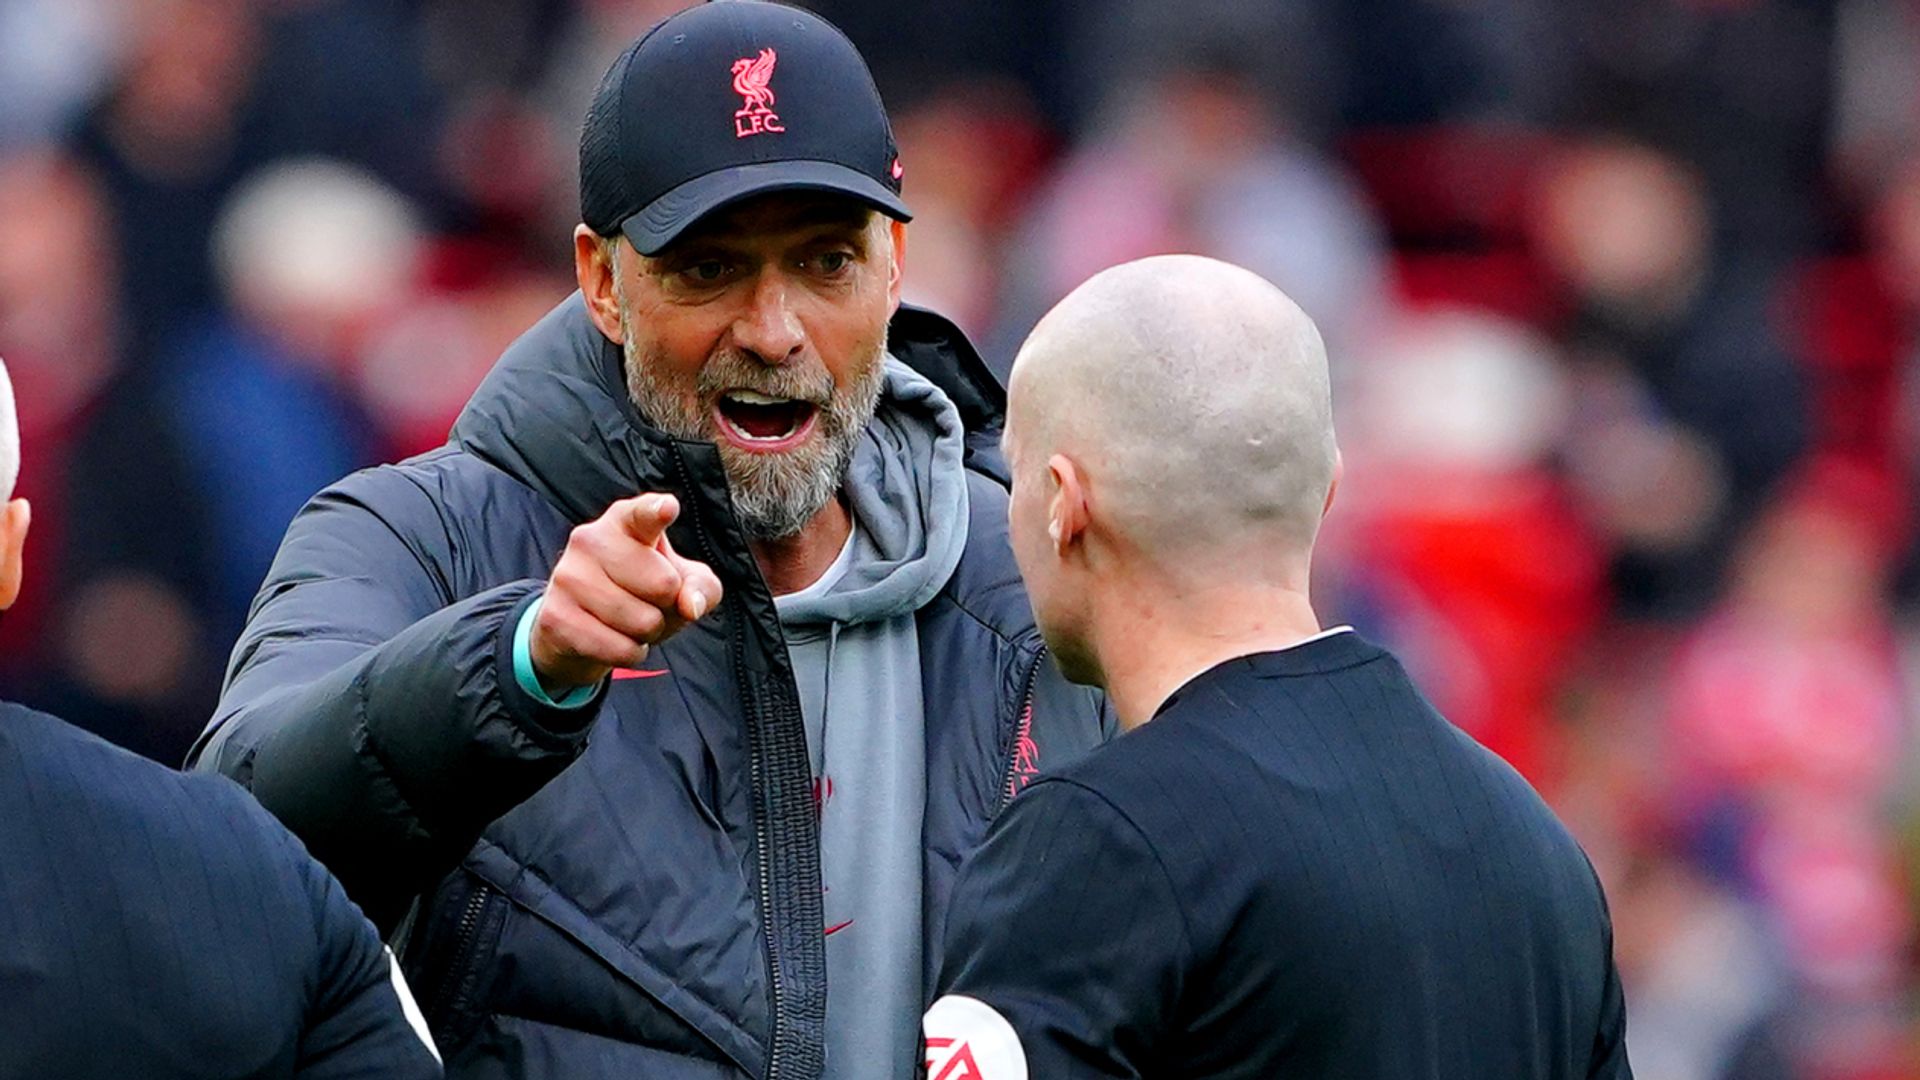 Klopp rages at ref Tierney again | 'We have history - what he said was not ok'